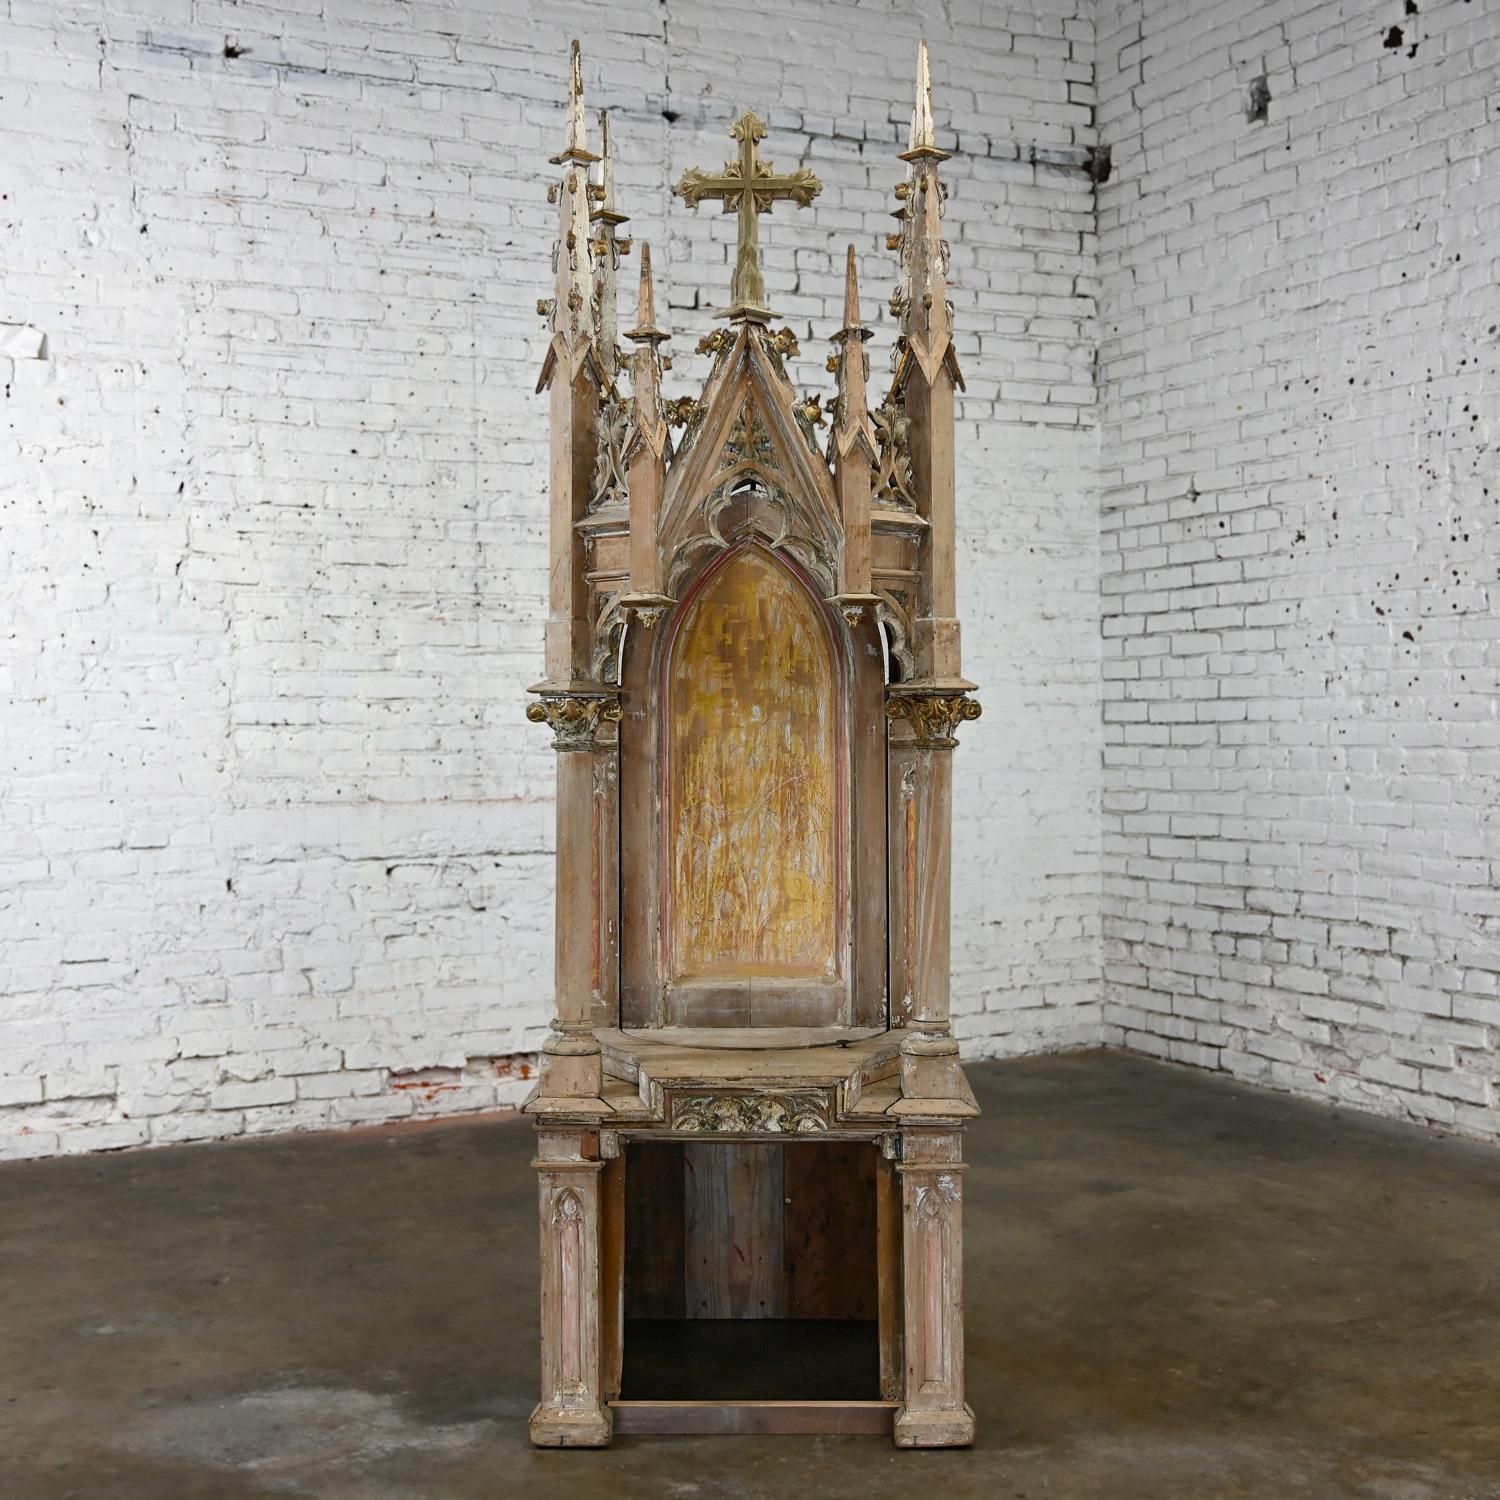 Marvelous antique Gothic Architectural Ecclesiastic church spire or steeple with pivoting shrine & distressed finish. Beautiful condition, keeping in mind that this is vintage and not new so will have signs of use and wear even if it has been